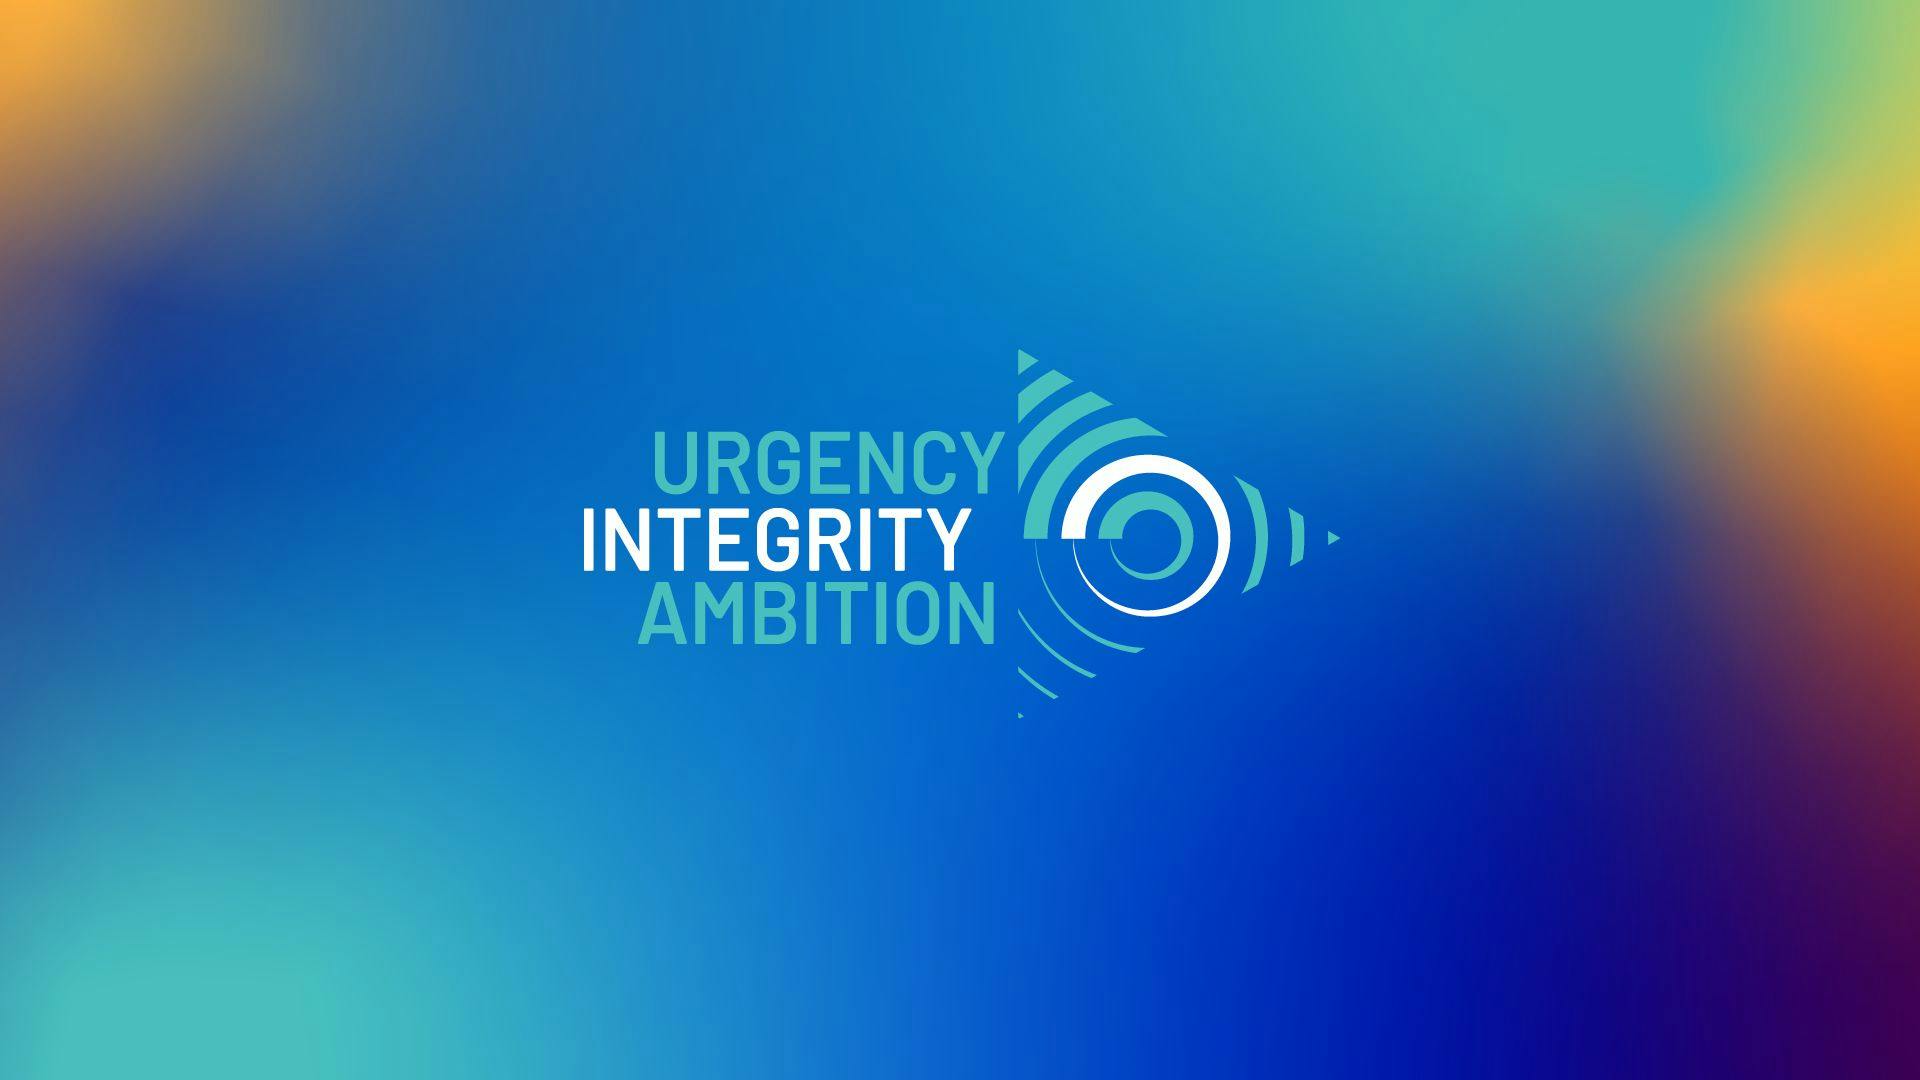 The main brand identity for the summit - Urgency Integrity Ambition